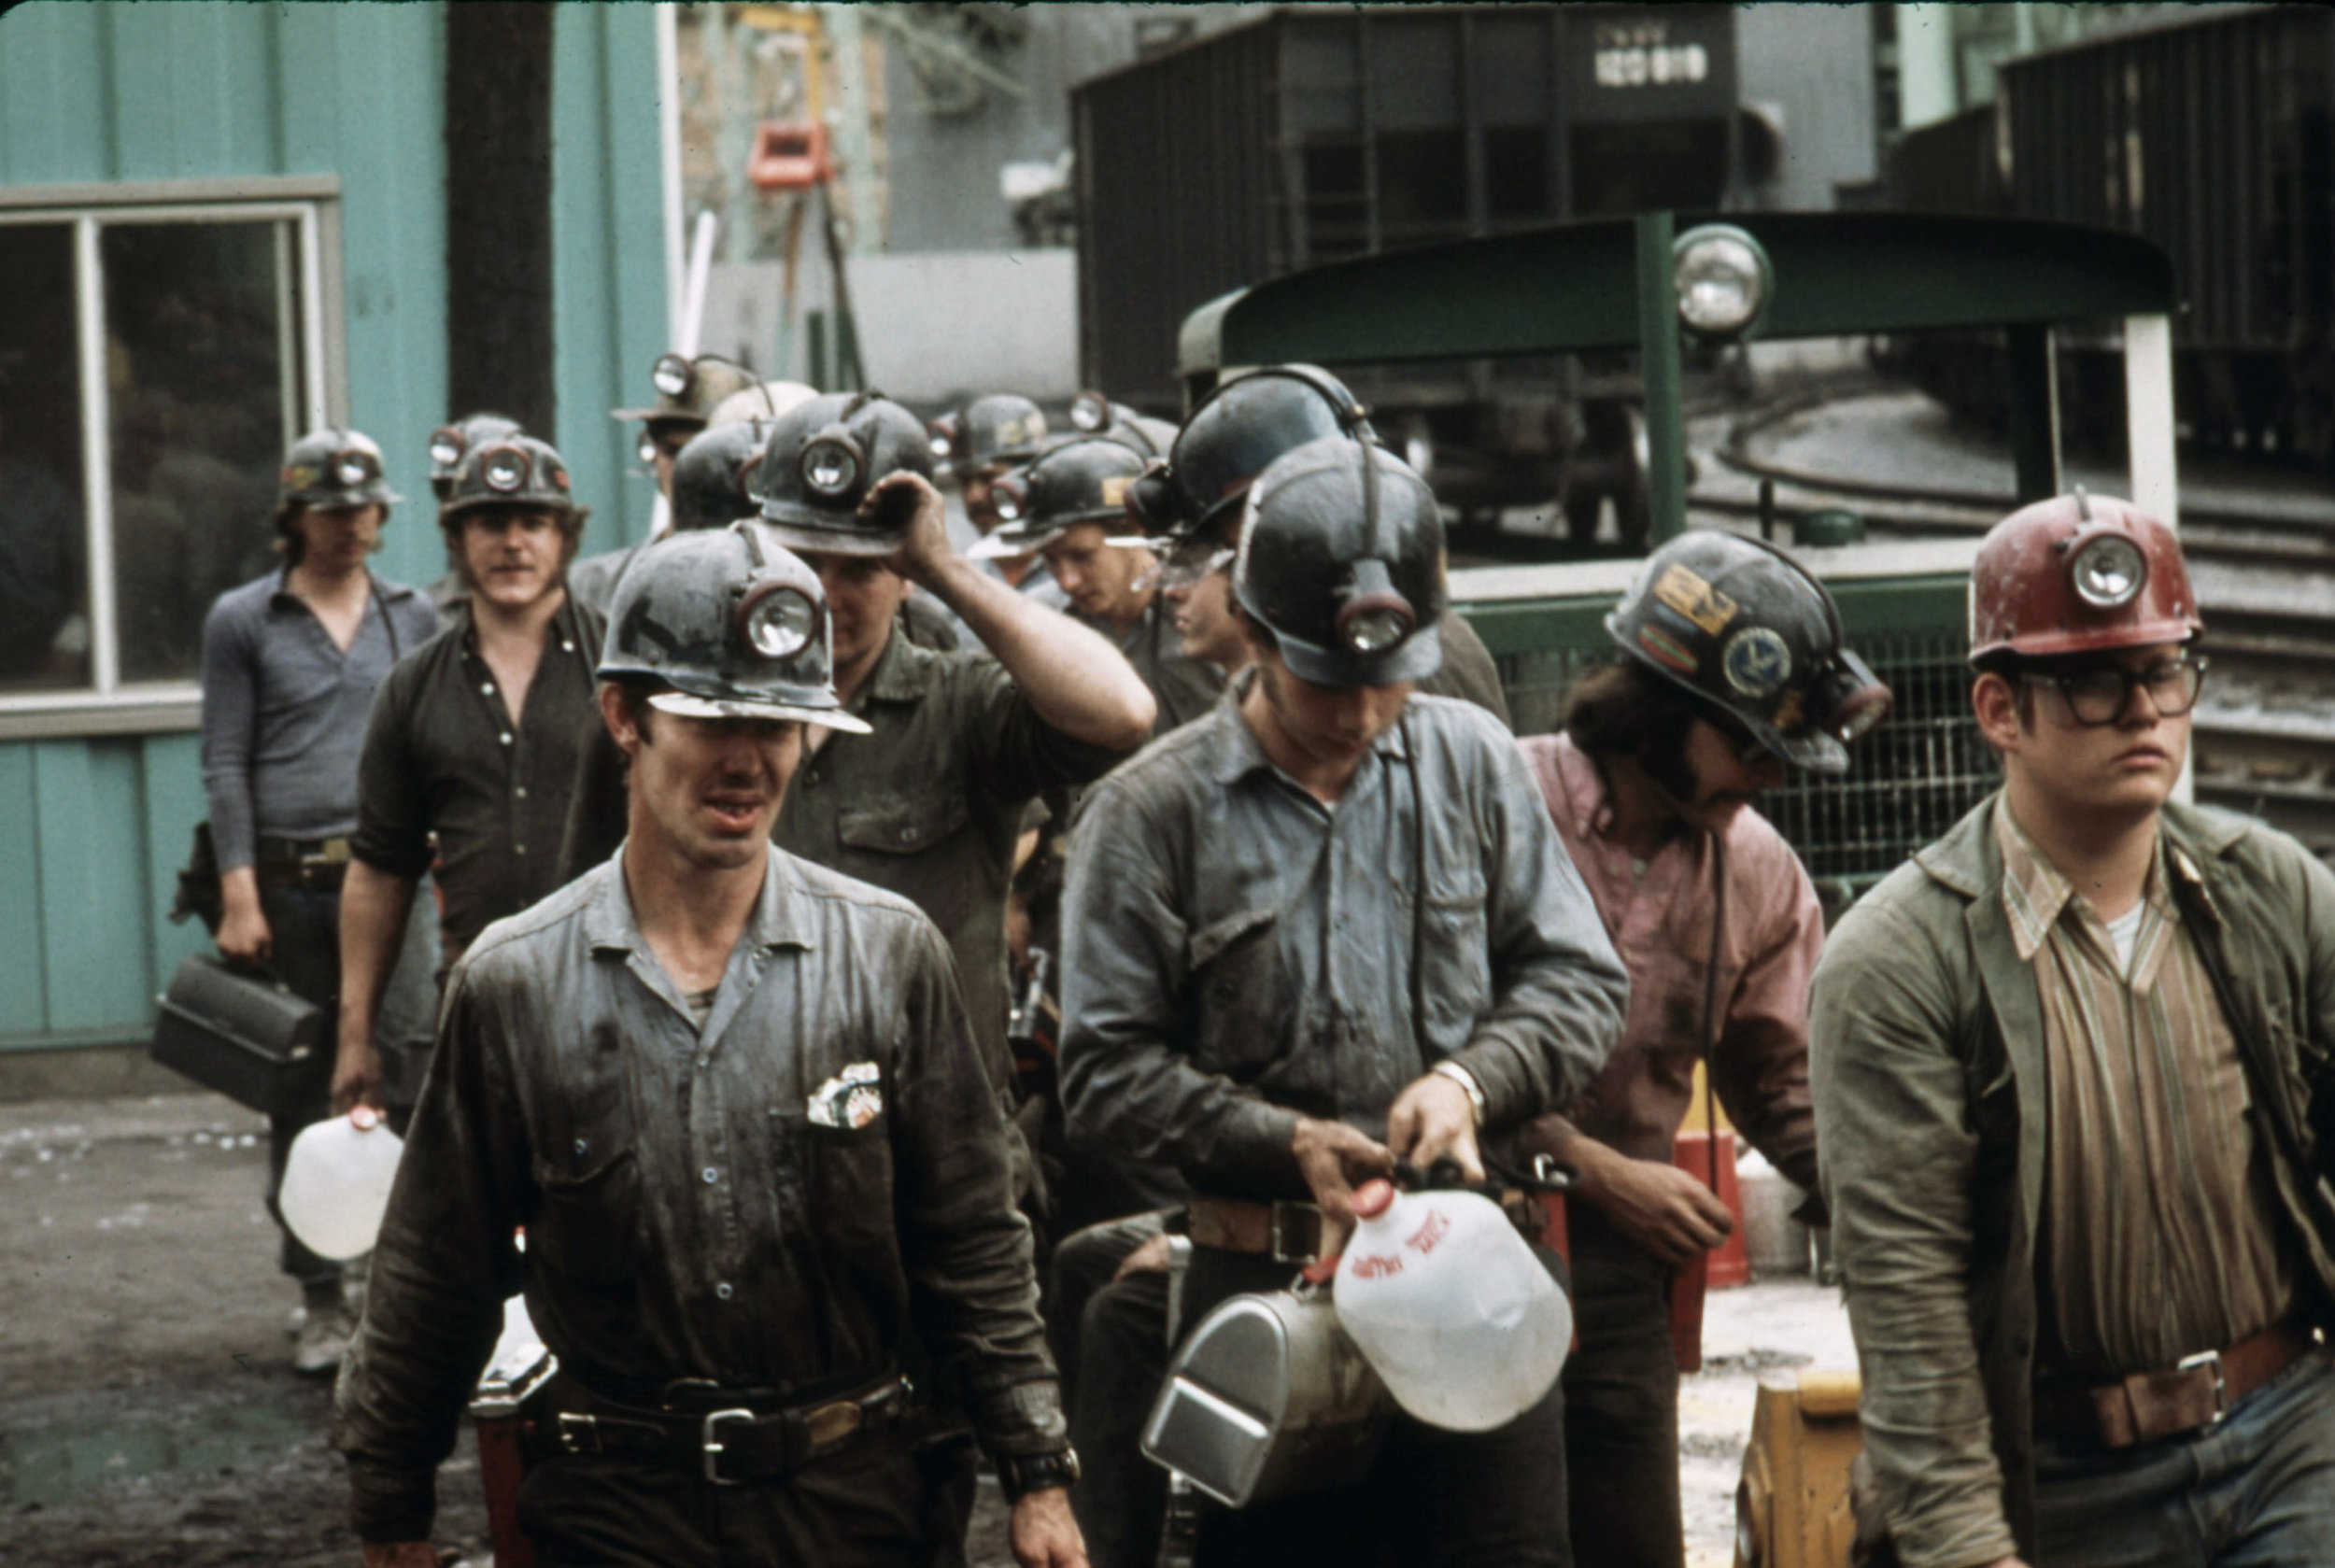 First shift of miners at the Virginia-Pocahontas Coal Company Mine #4 near Richlands, VA, 1974 Source: US National Archives